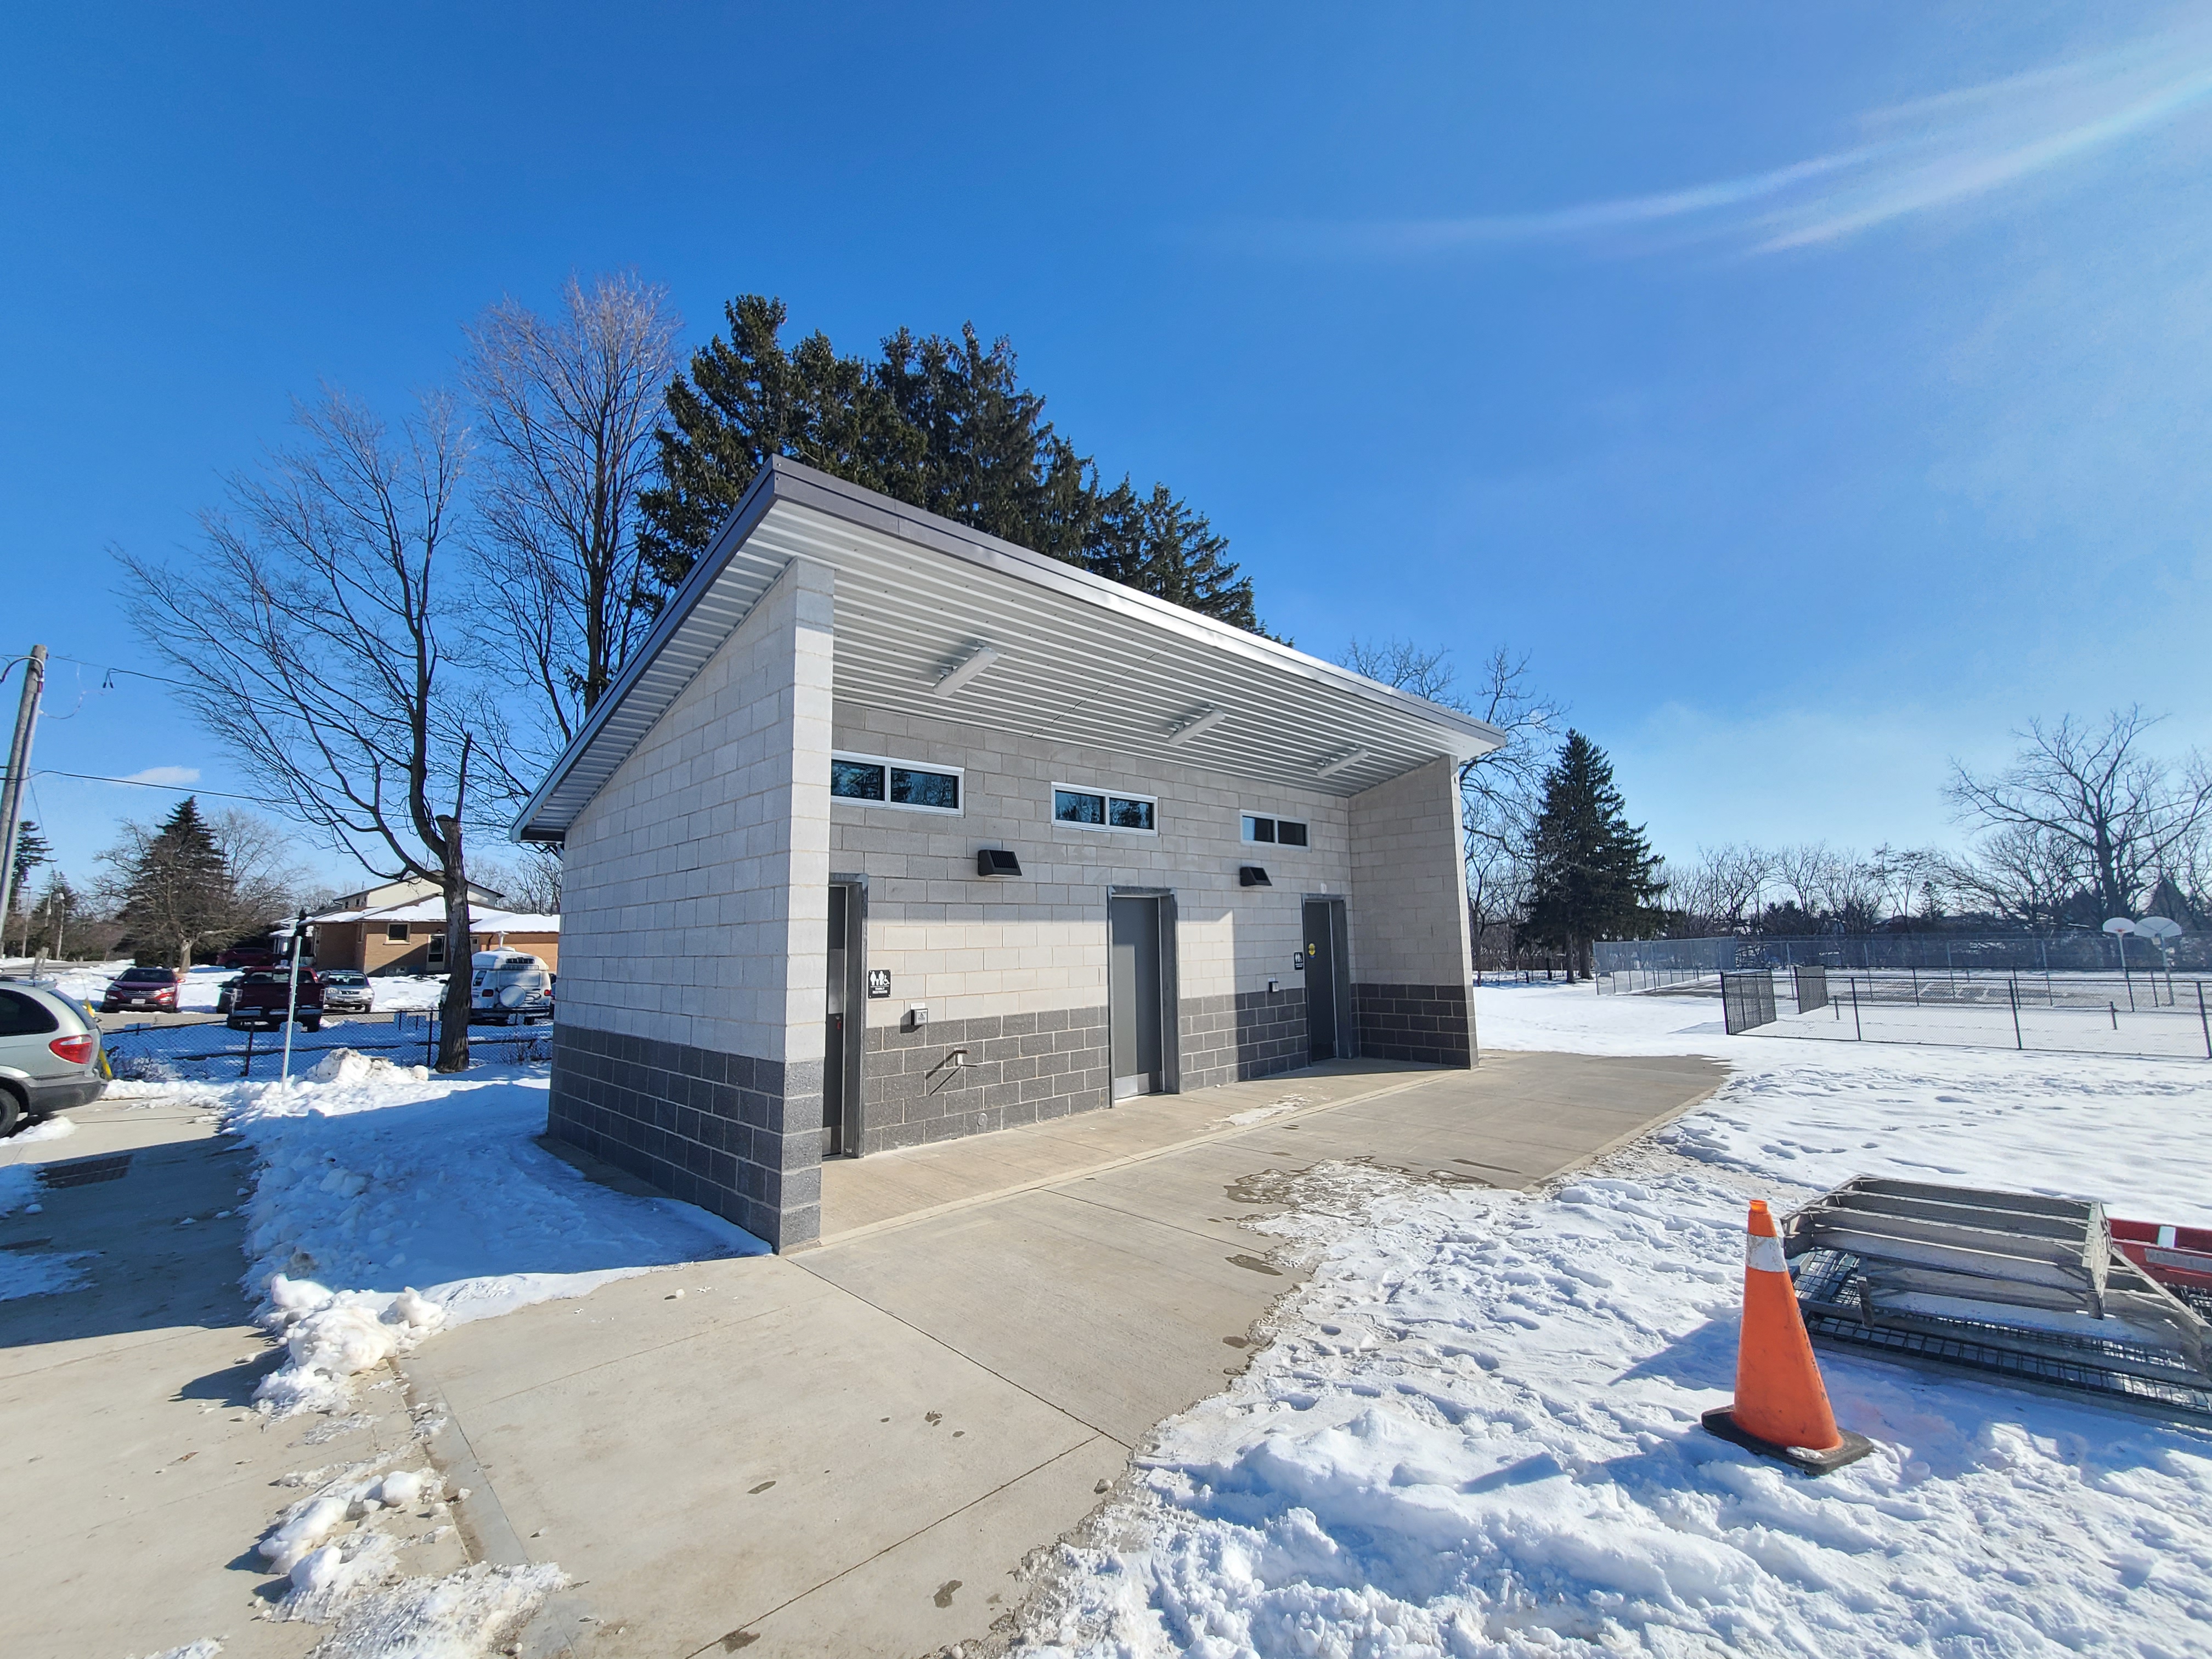 Union Street Park in Belmont, Ontario – New Service Facilities Building